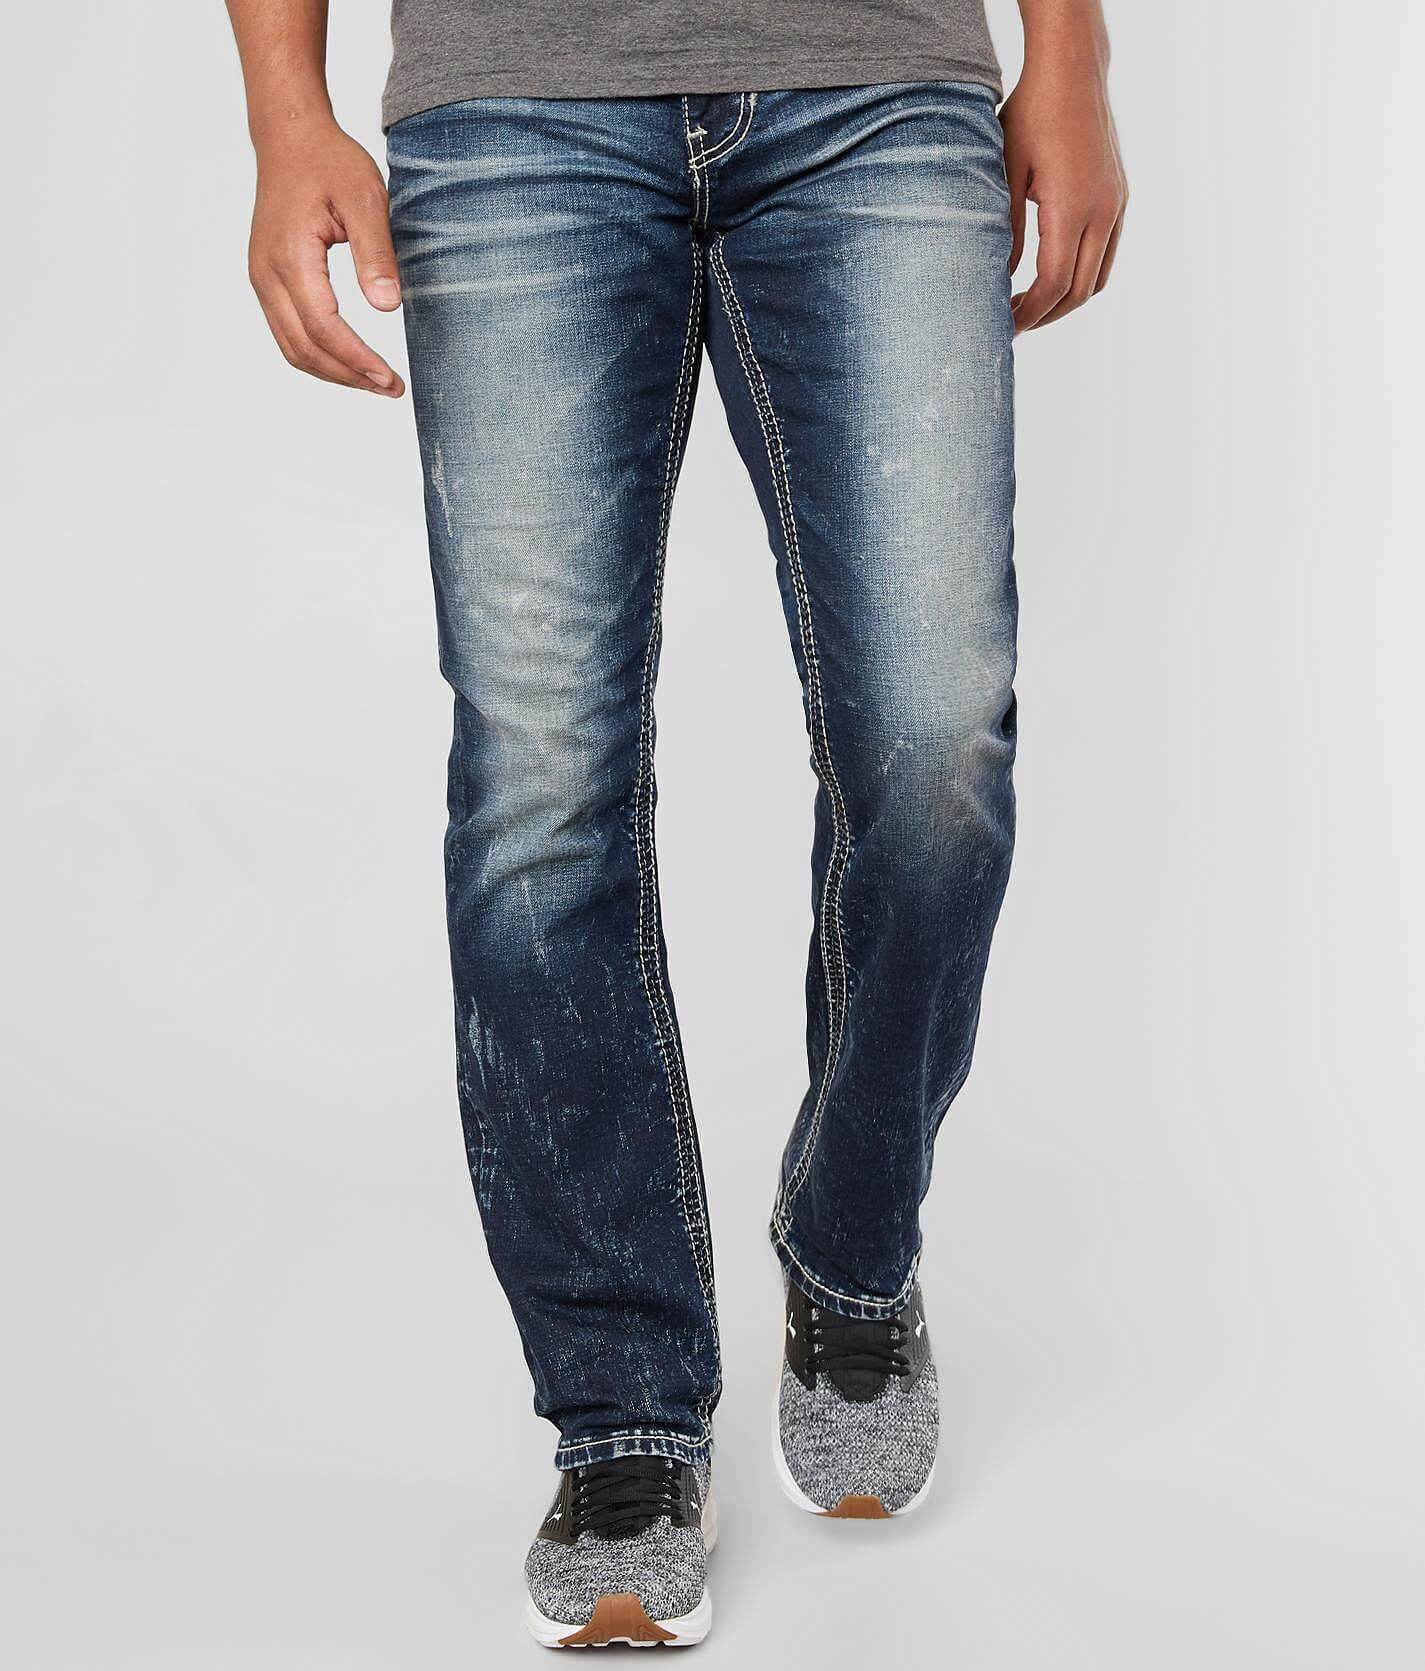 buckle american fighter jeans